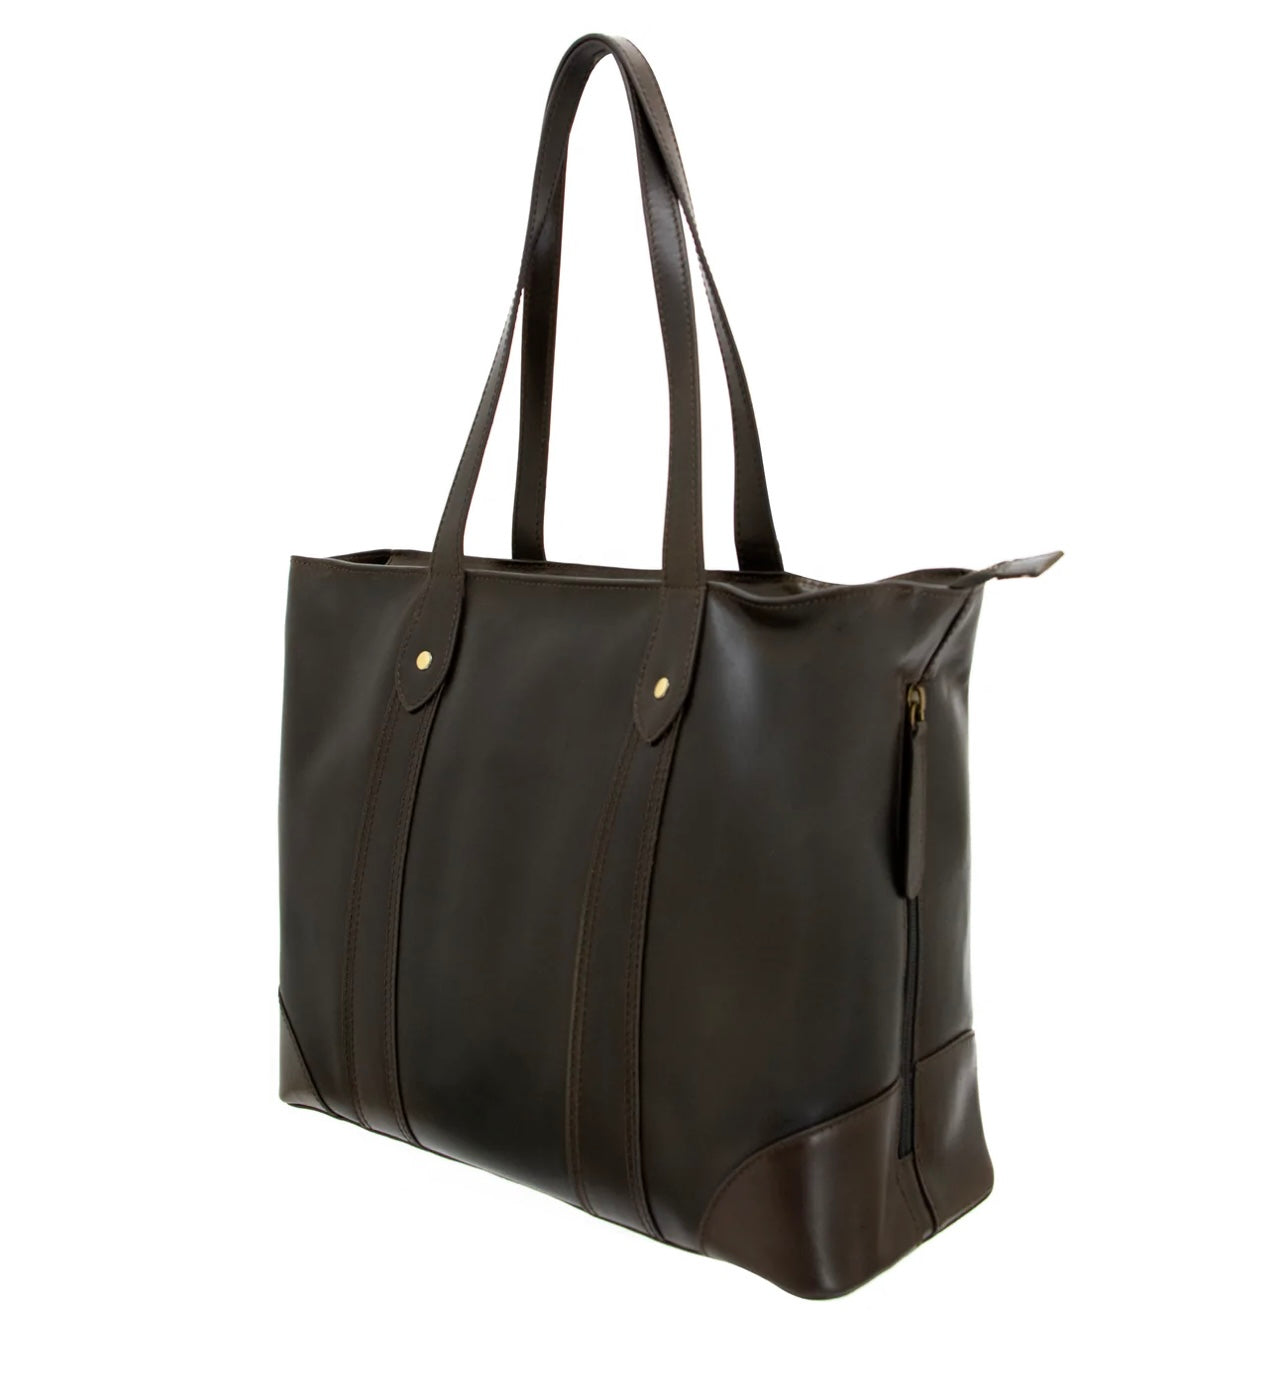 Gaia Concealed Carry Leather Tote - Hiding Hilda, LLC